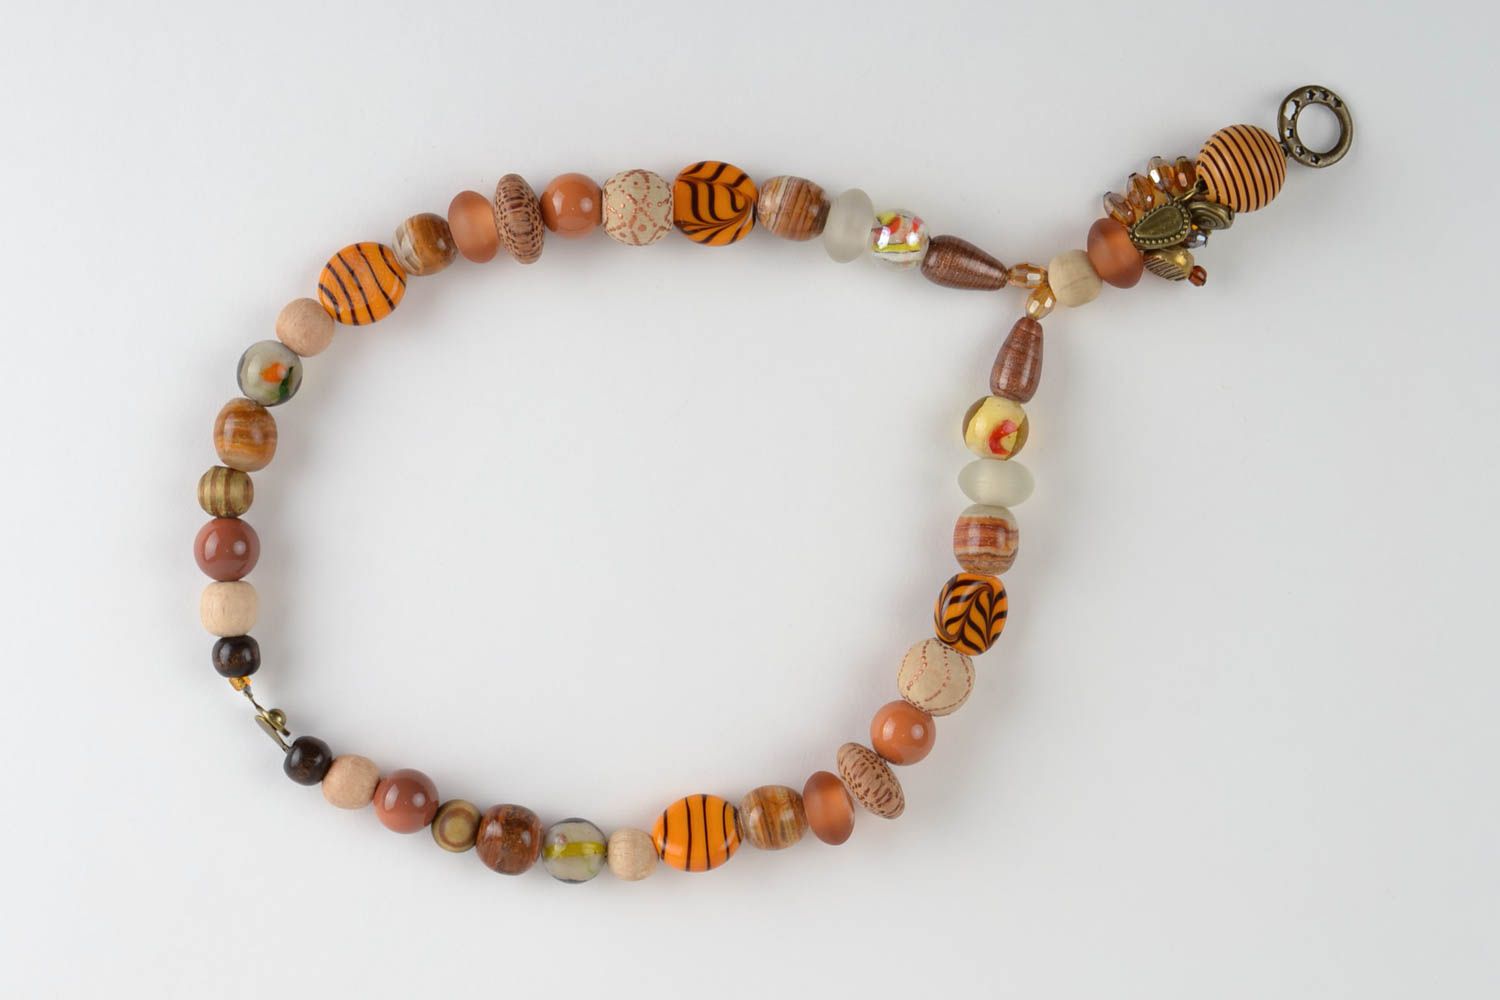 Handmade natural stone necklace with jadeite crystal and cork wood beads photo 3